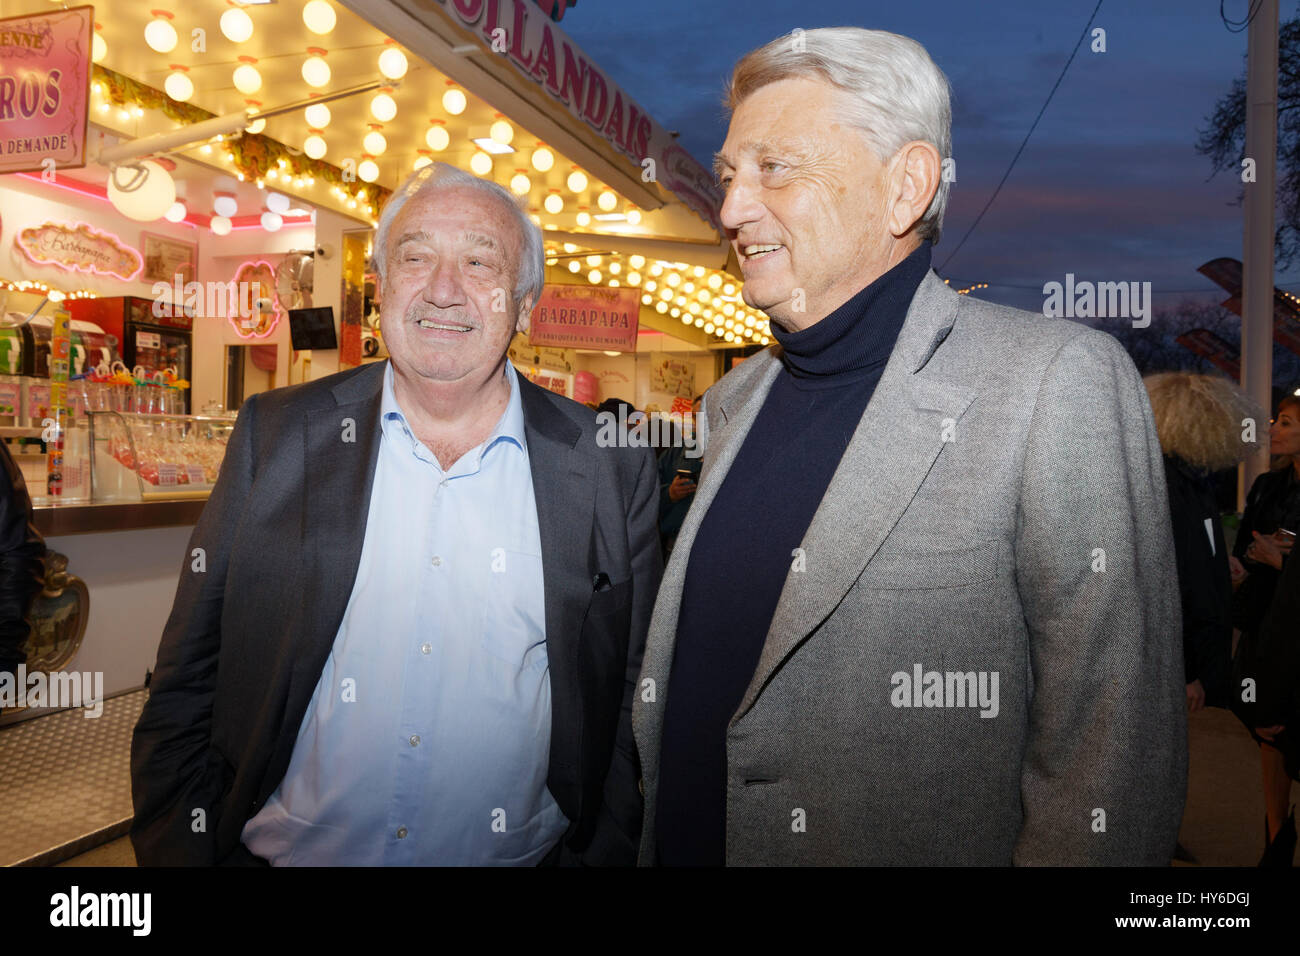 Marcel Campion and Alain Madelin attend at Opening evening of the 2017 Throne Fair for the benefit of the Association Petits Princes, Paris, France. Stock Photo